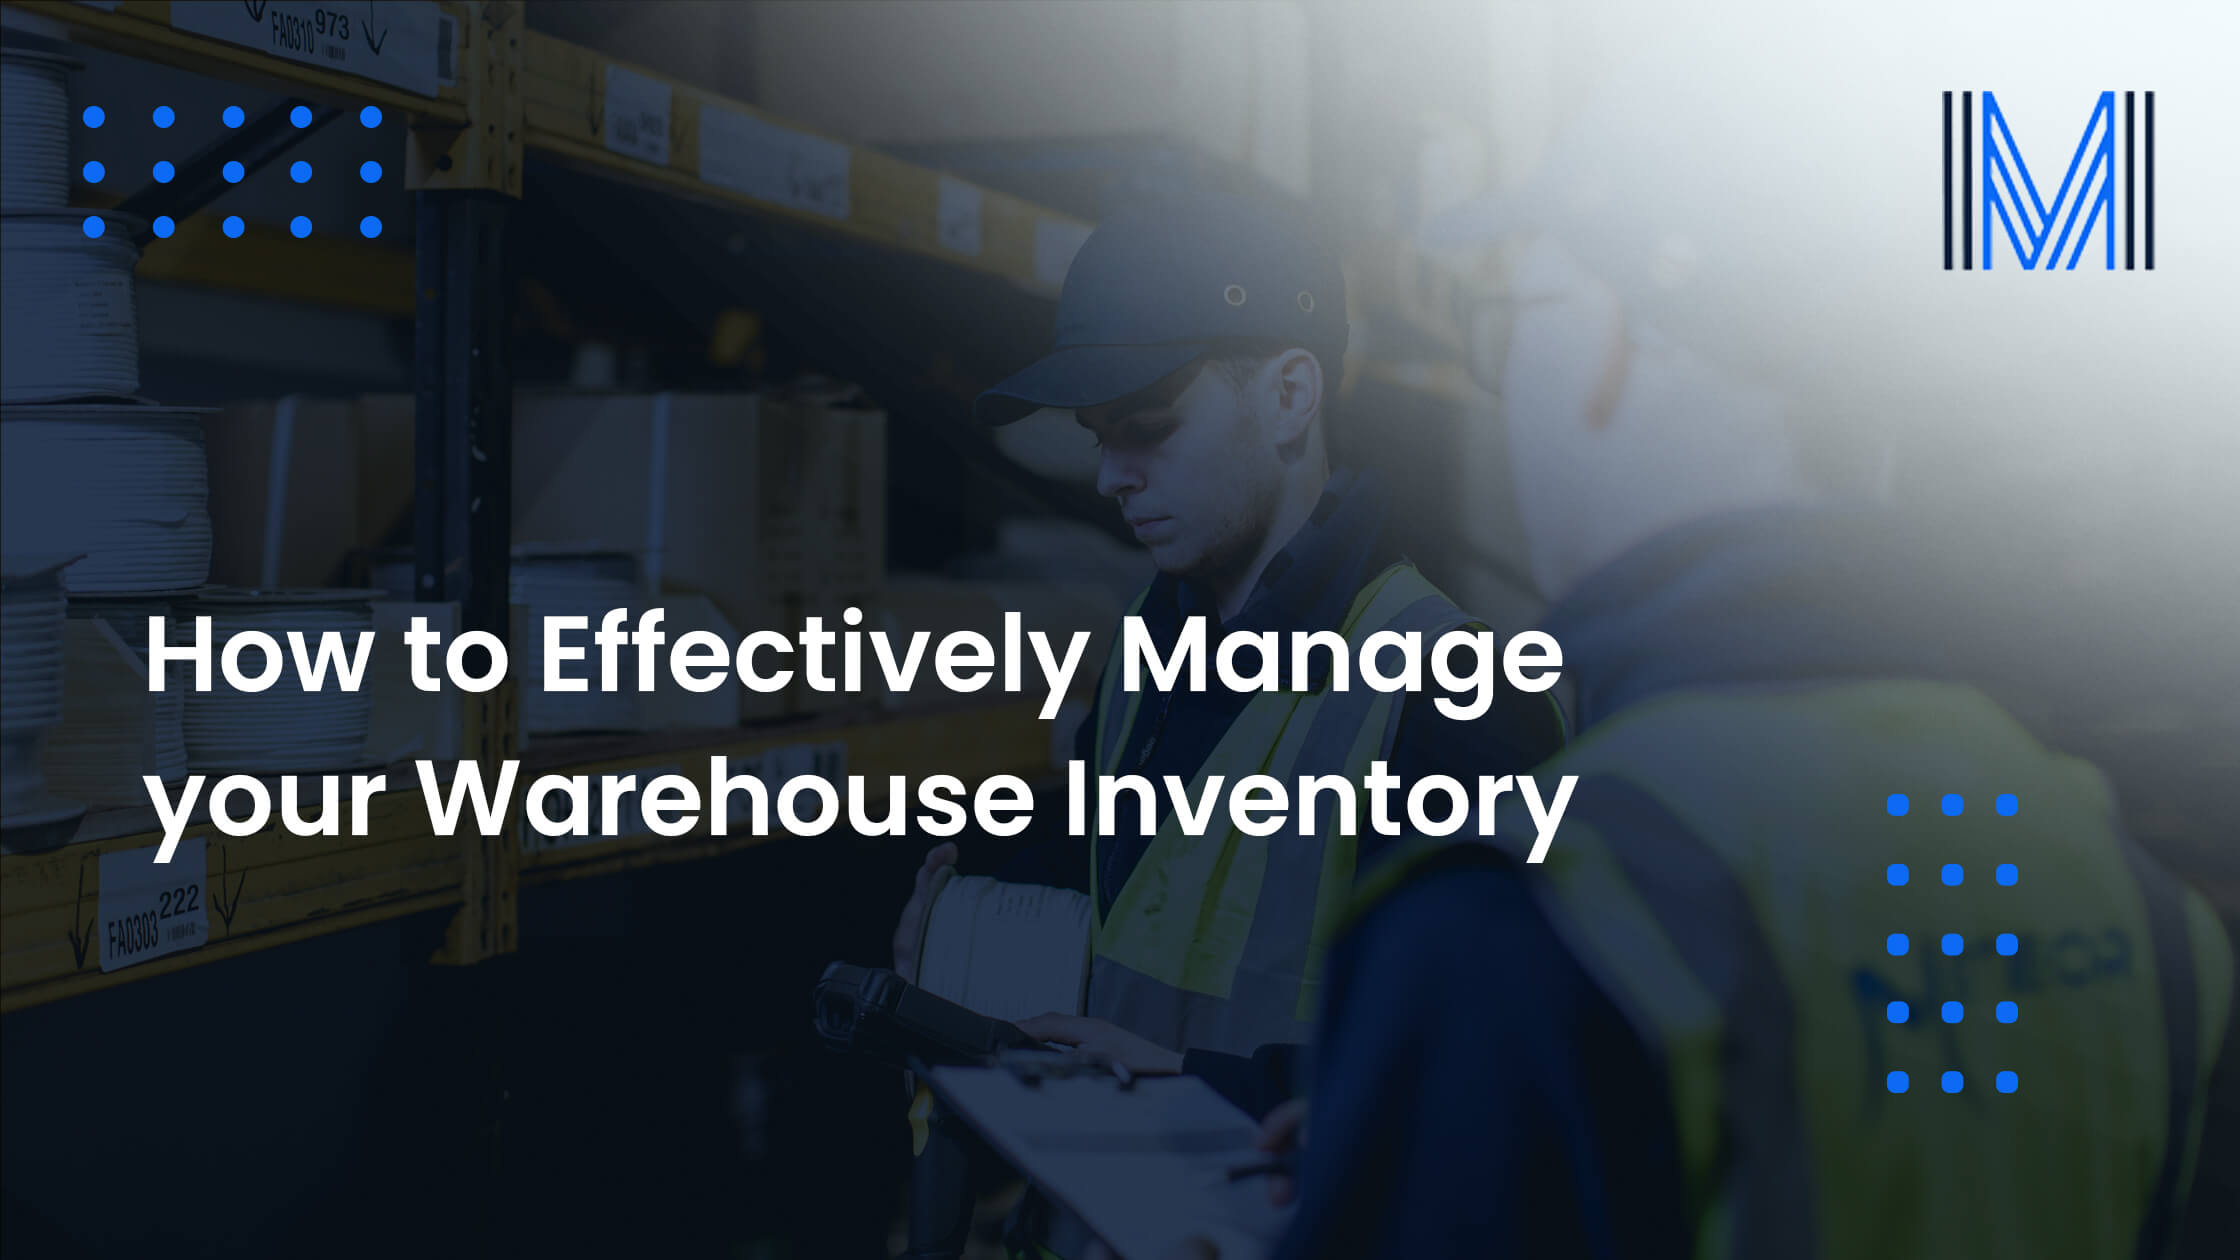 How to Effectively Manage your Warehouse Inventory